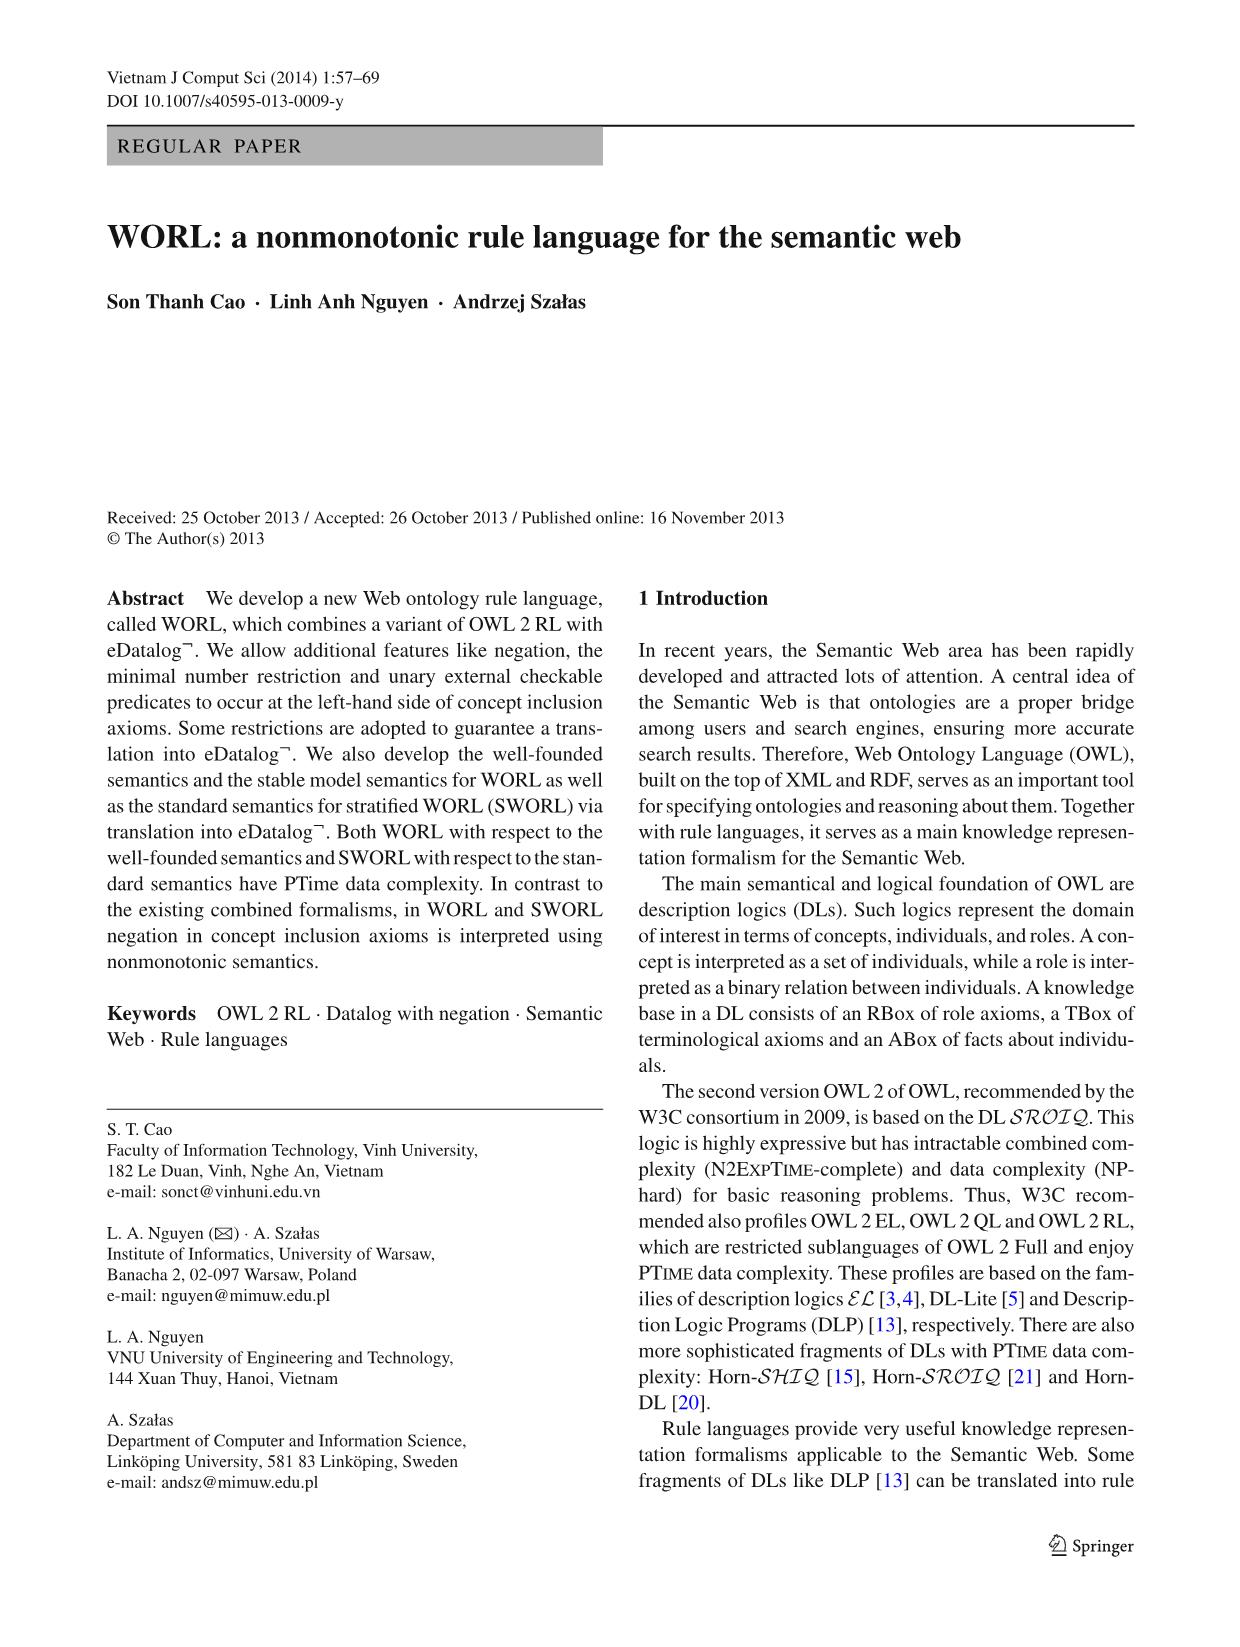 Worl: A nonmonotonic rule language for the semantic Web trang 1